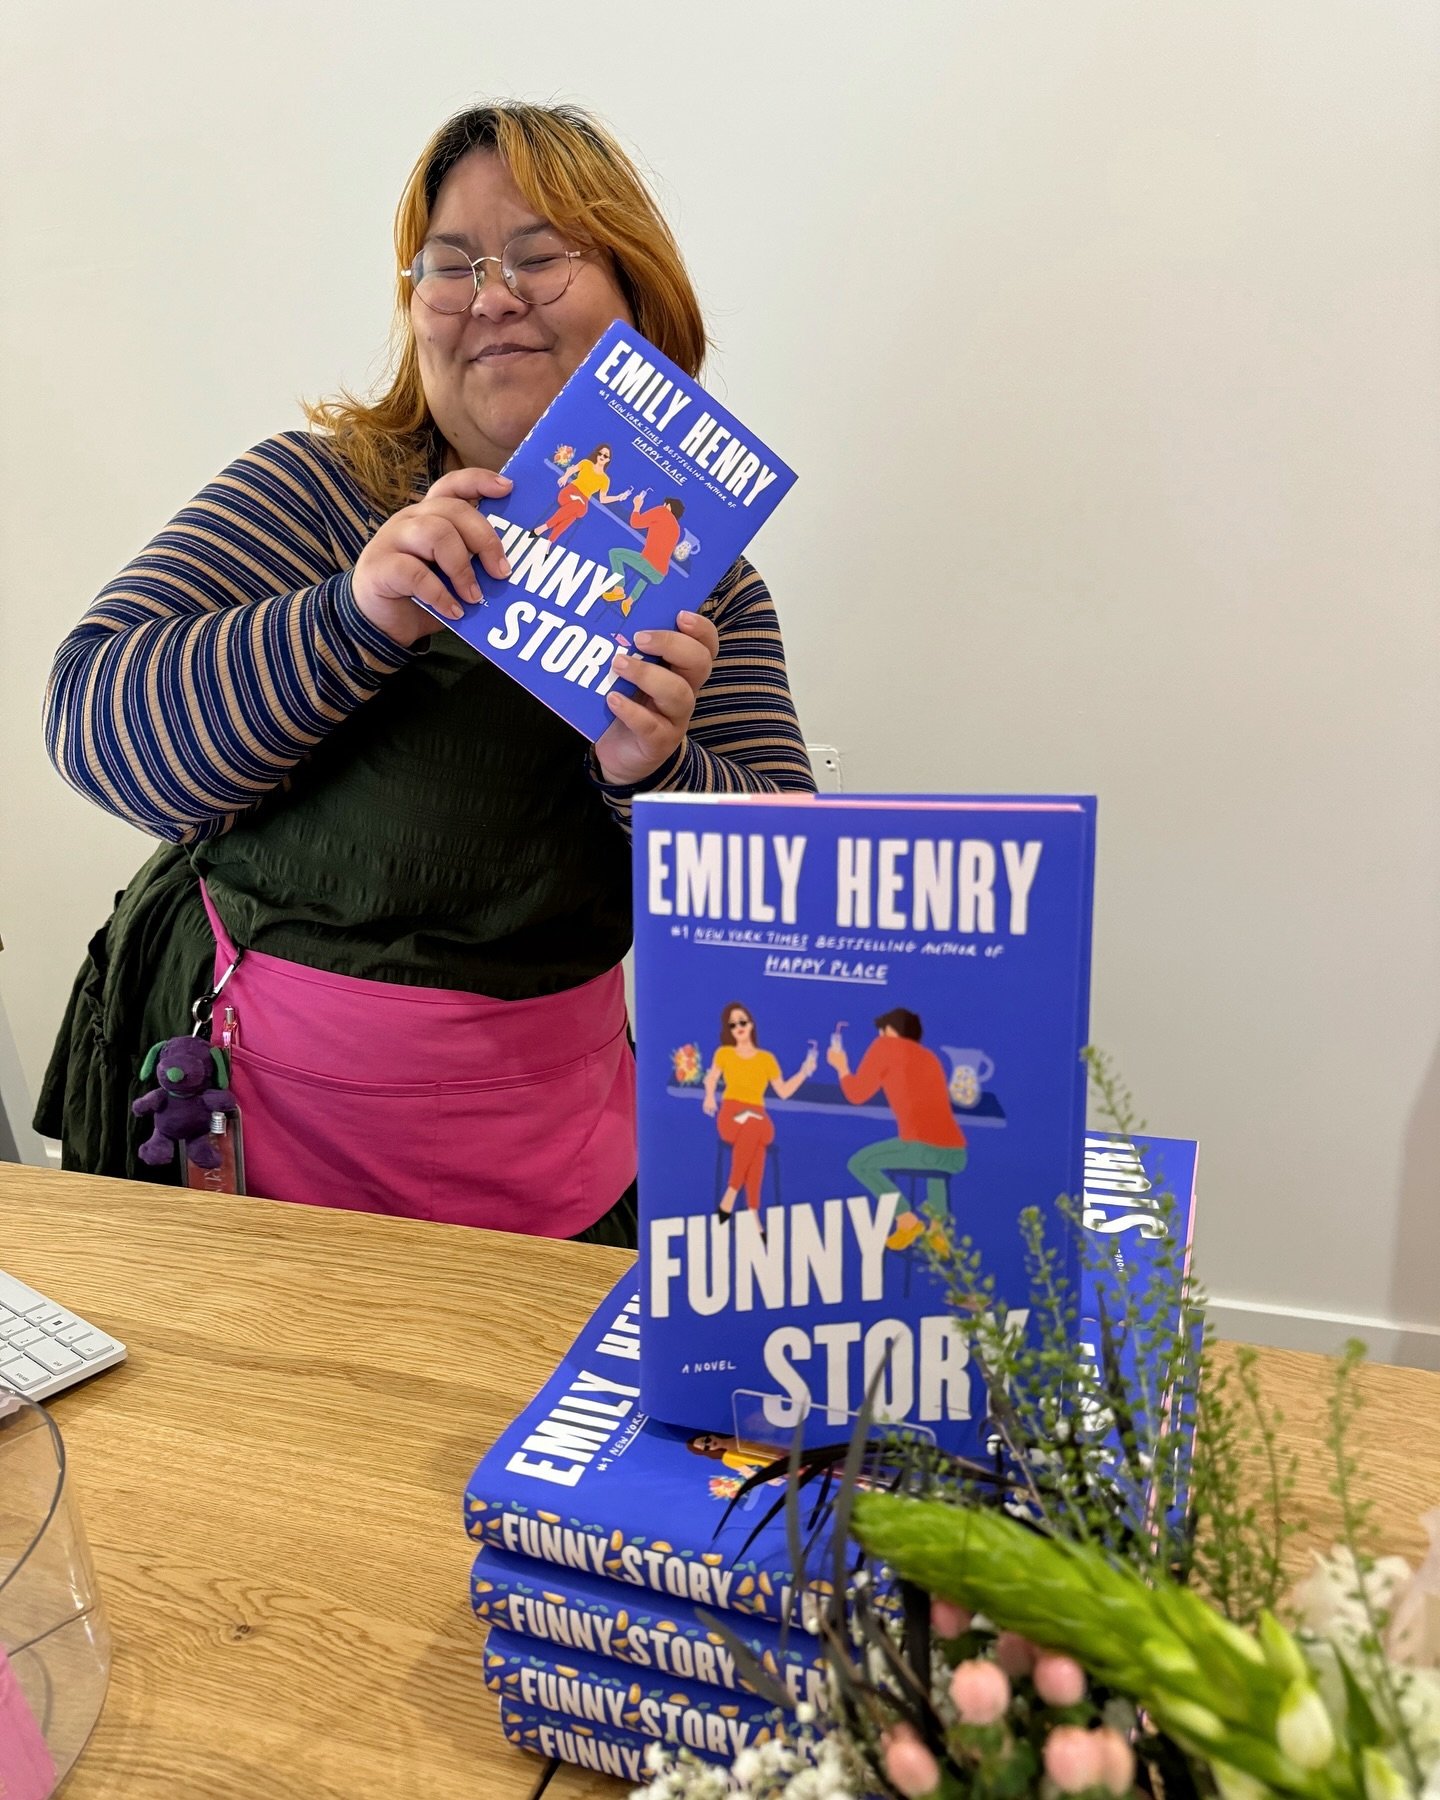 HAPPY PUB DAY! We can&rsquo;t wait to hang and party with everyone tonight at our Release Party for the book we&rsquo;ve all been waiting for&hellip; Funny Story by @emilyhenrywrites 🤩

If you aren&rsquo;t joining us tonight but would like to purcha